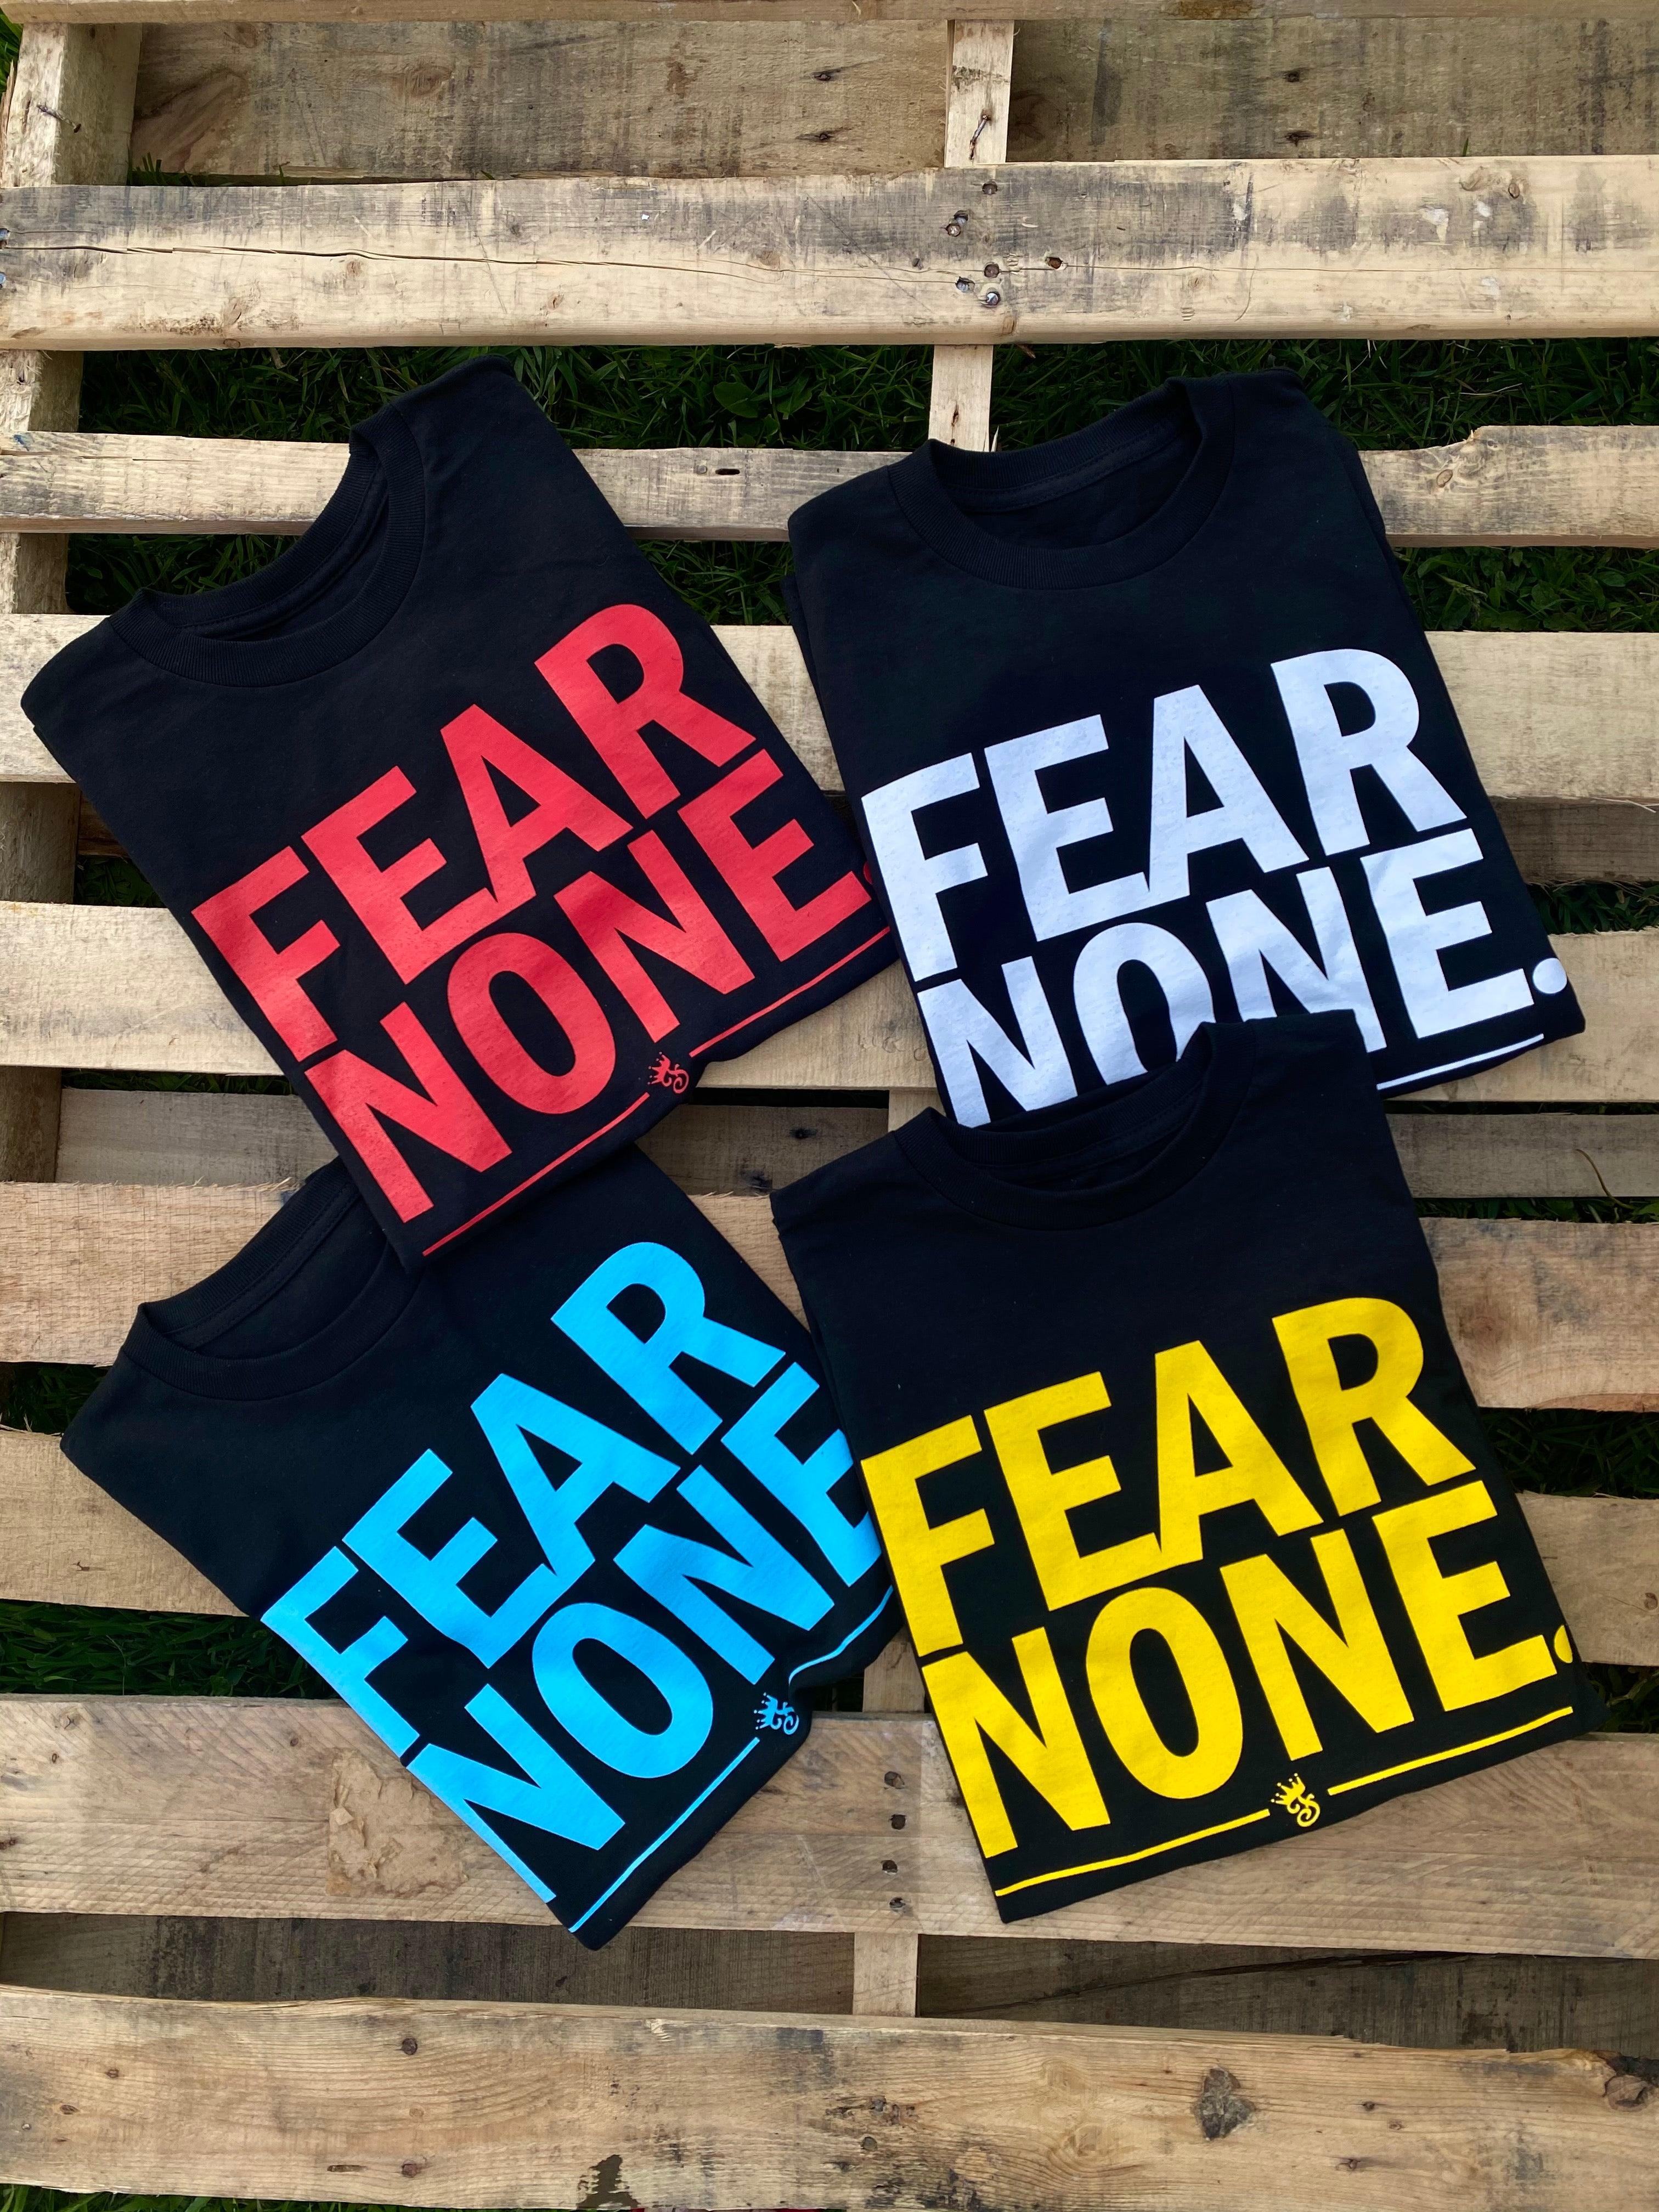 FEAR NONE T-SHIRT - Famous Club Clothing